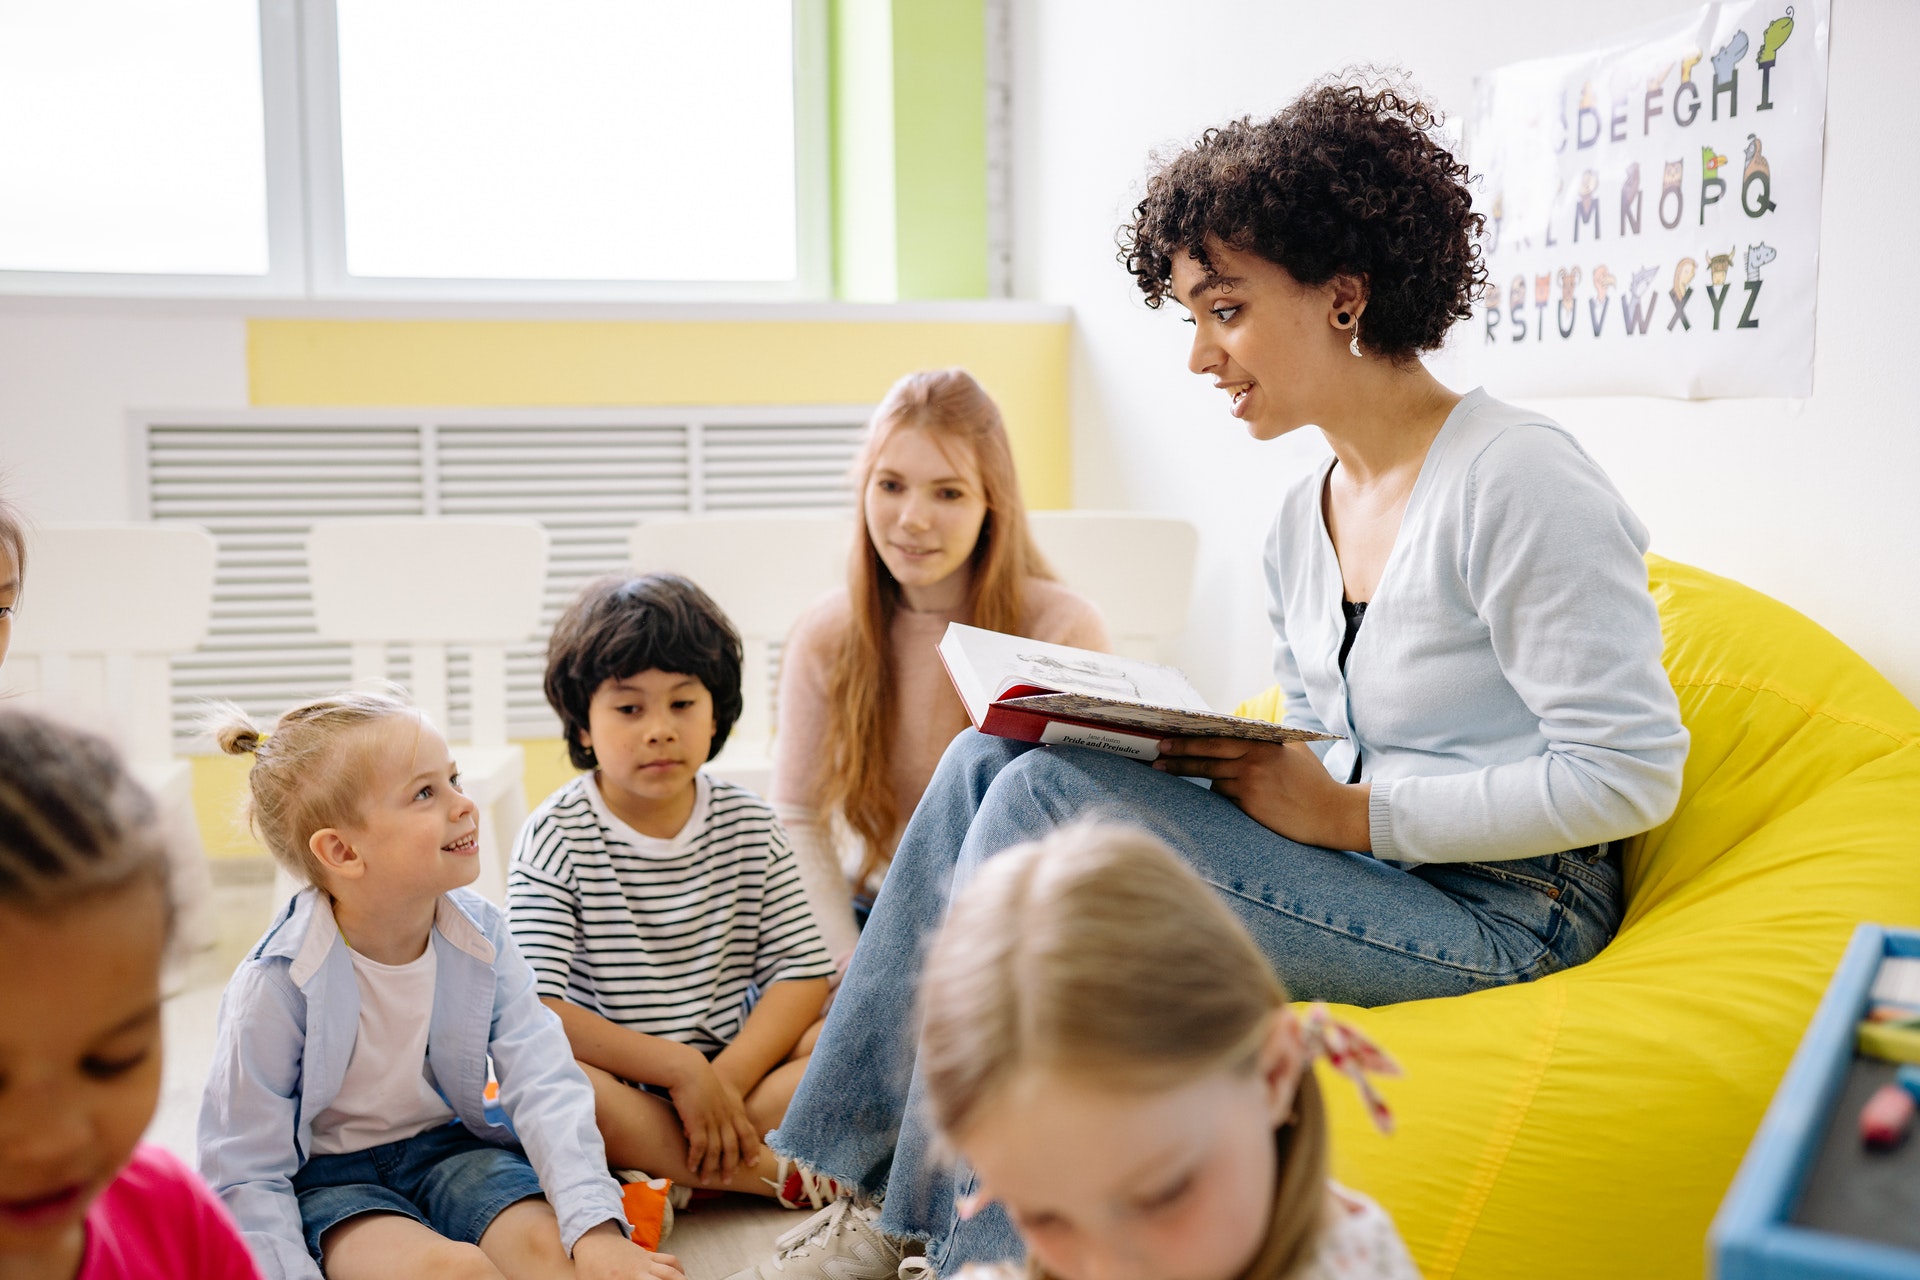 Why HVAC Systems are Critical for School Indoor Air Quality